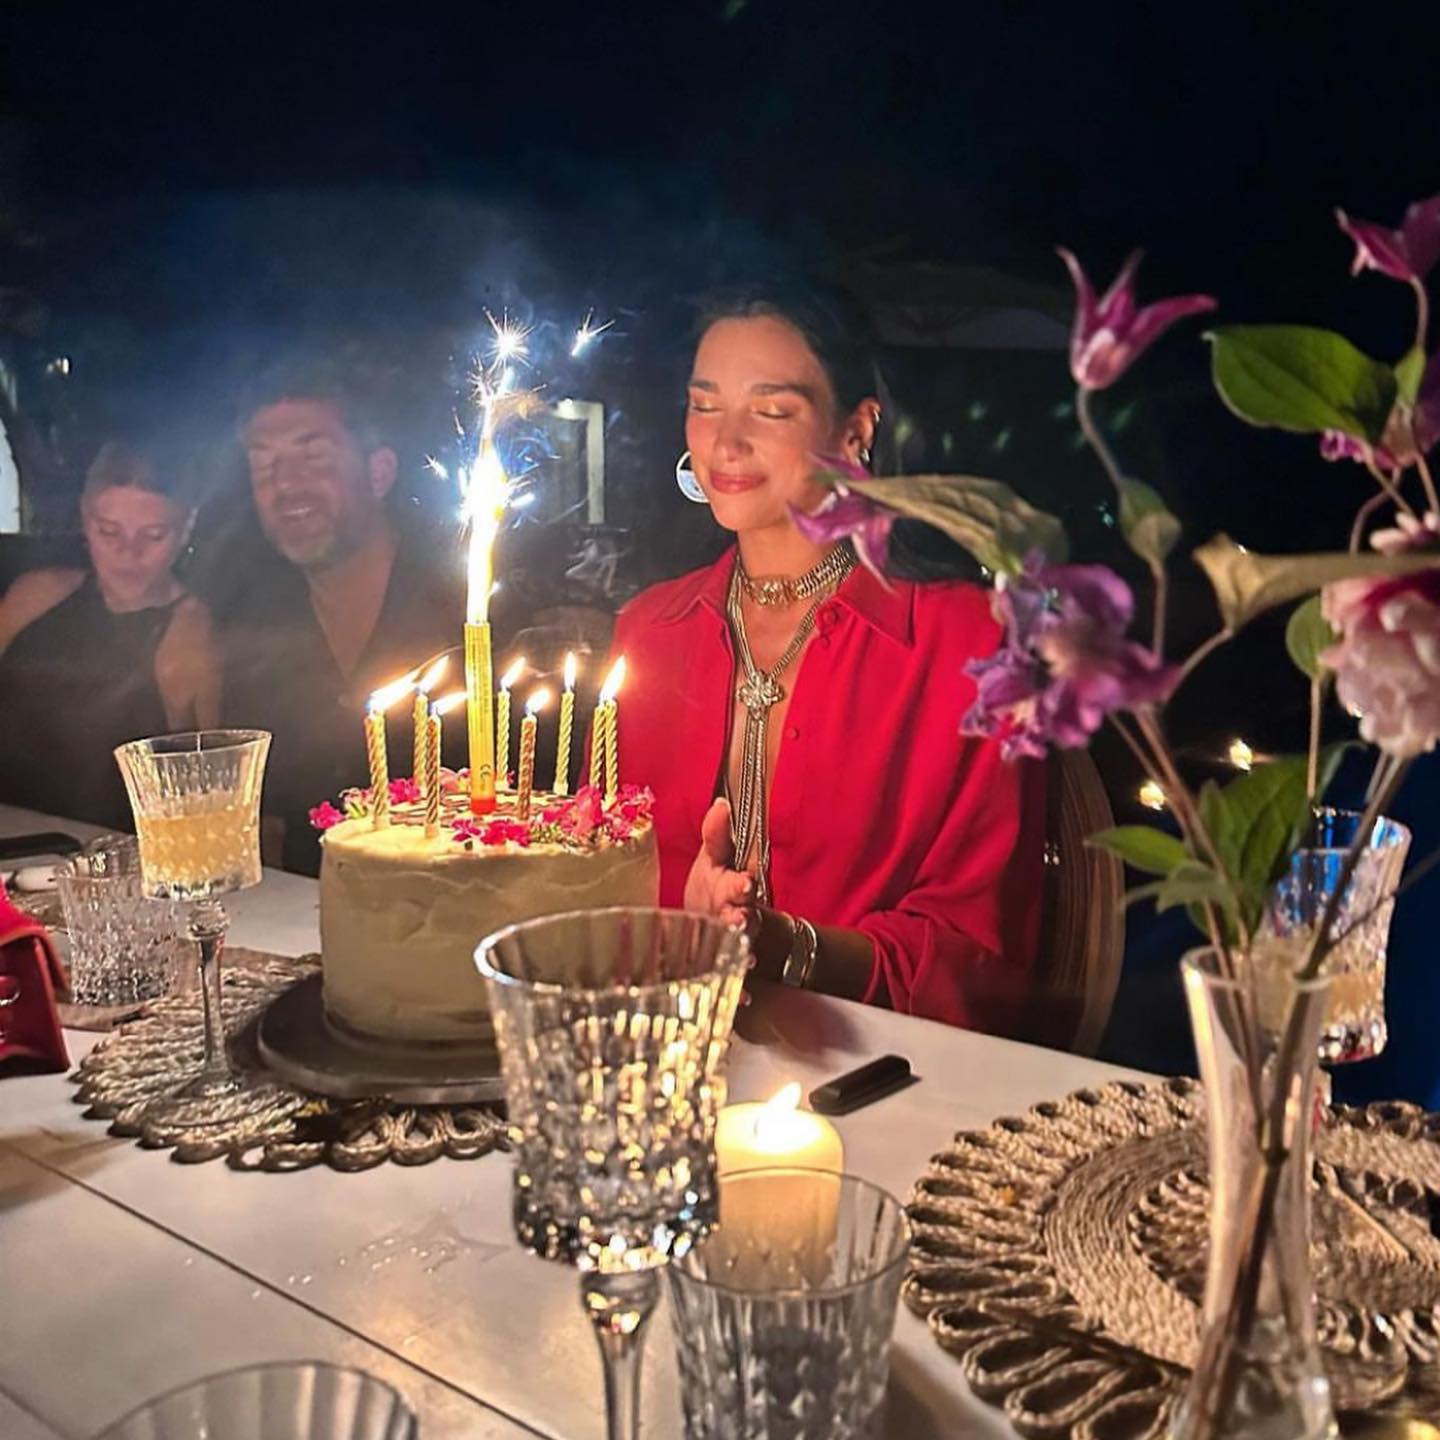 Dua marked turning 28 with a huge cake